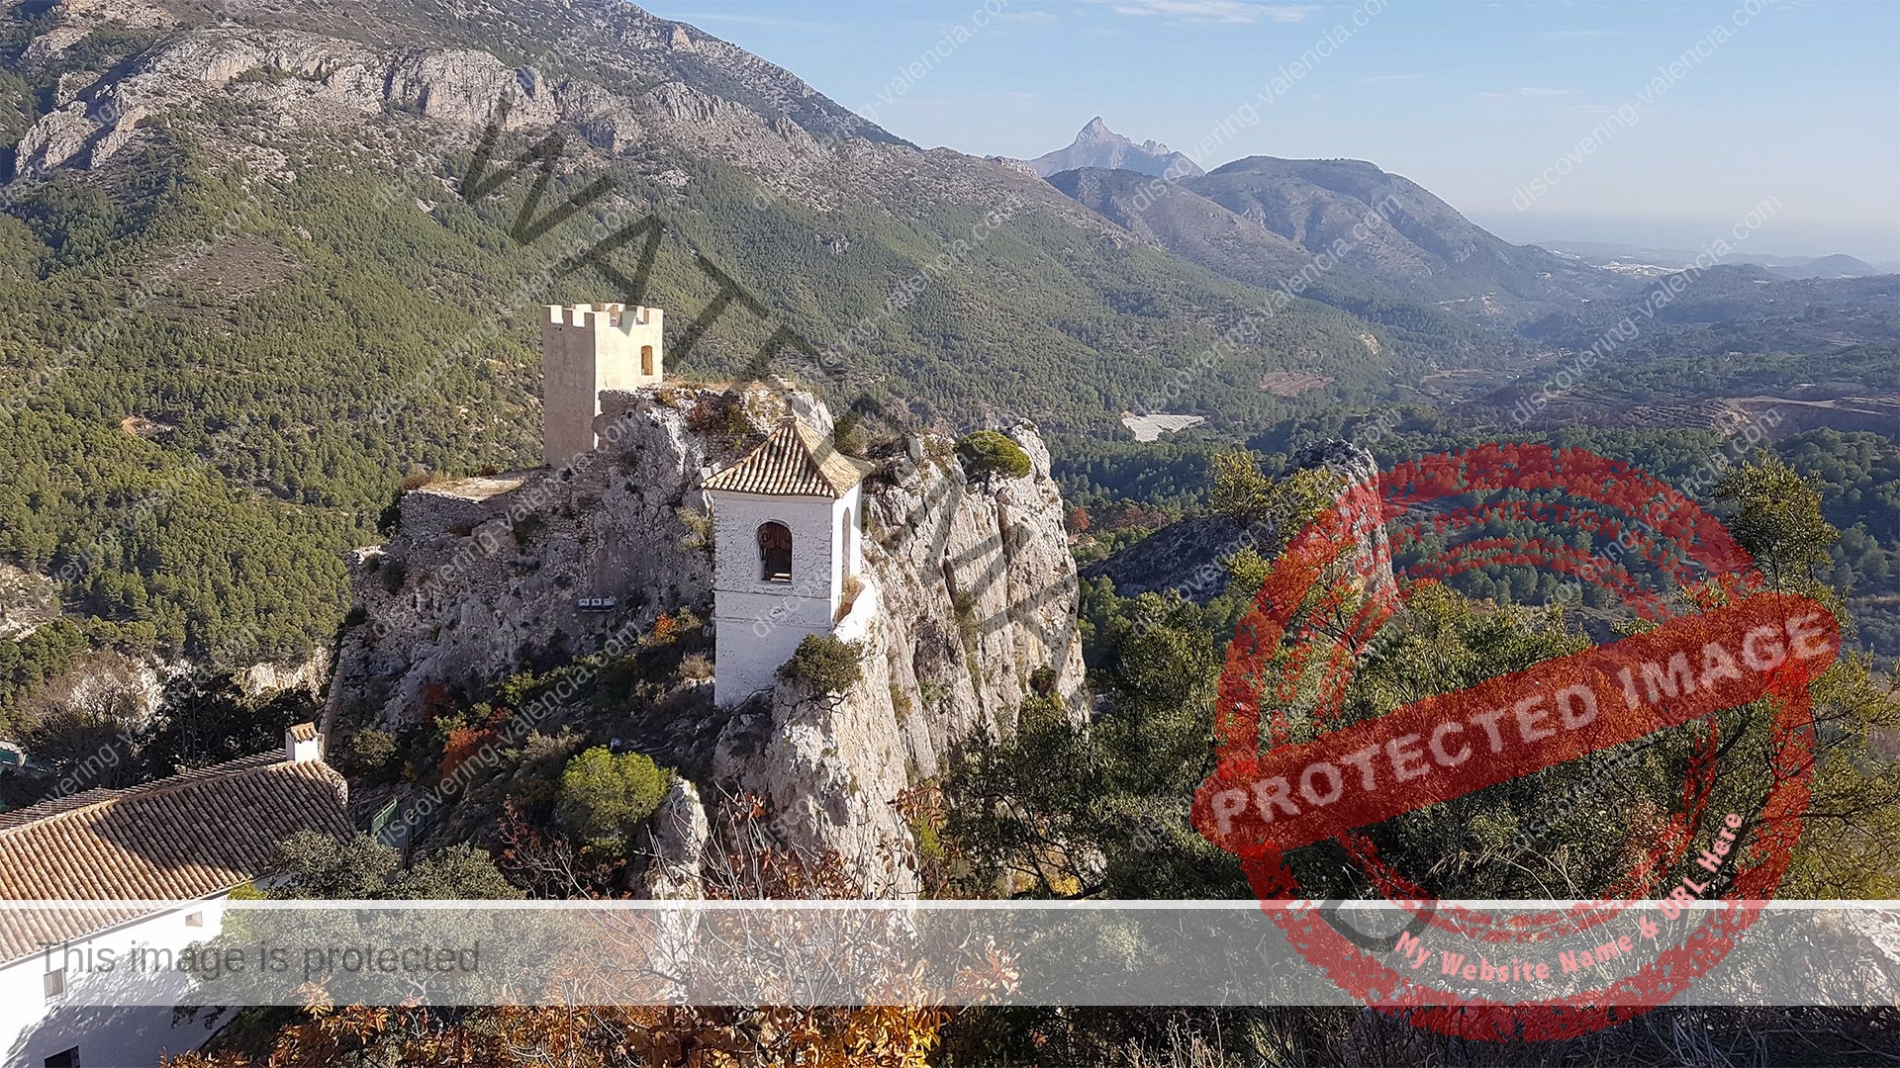 Guided Tour Guadalest and its Hidden Treasures